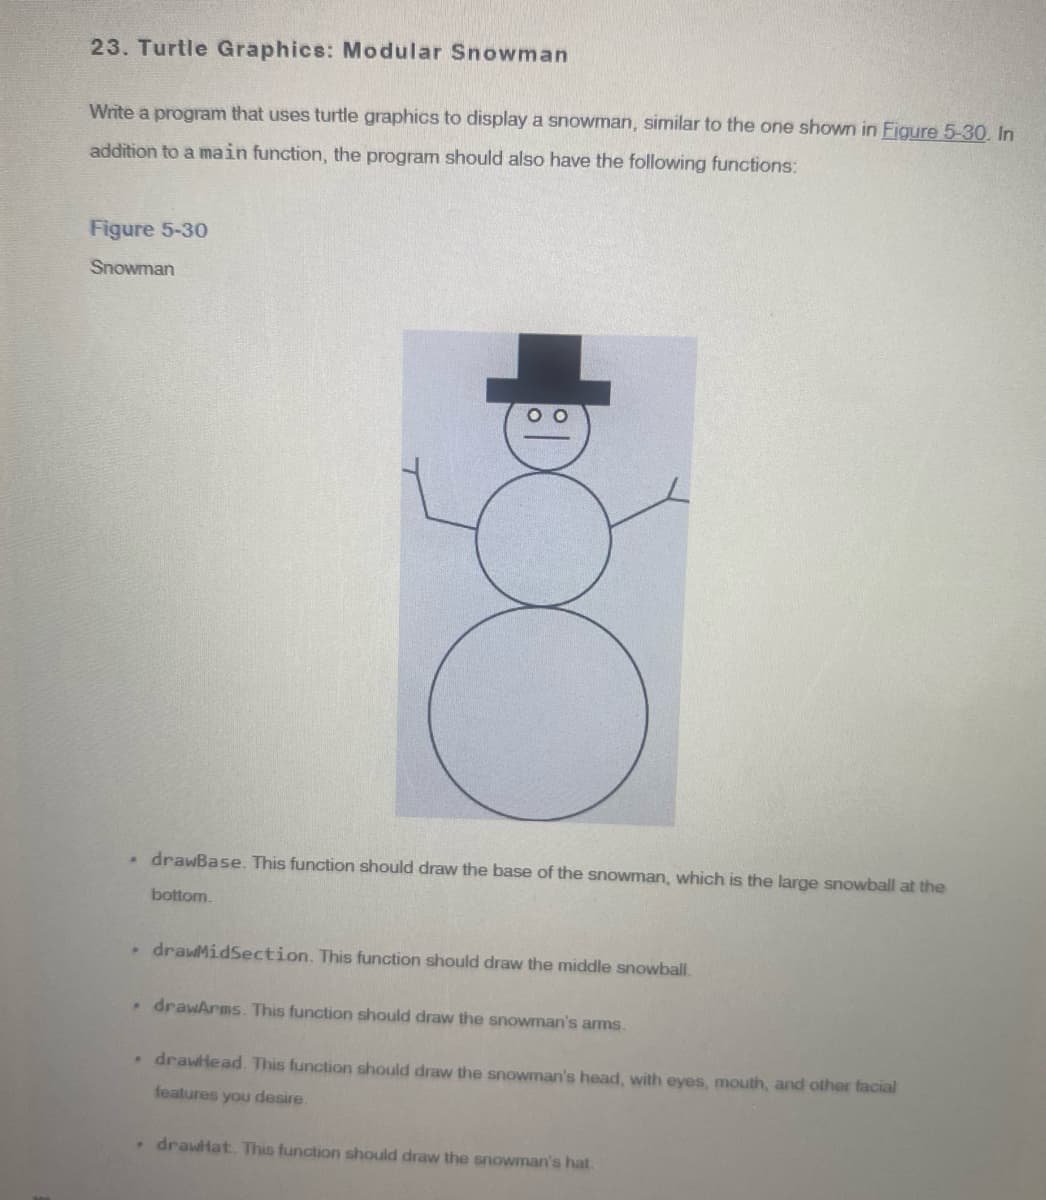 23. Turtle Graphics: Modular Snowman
Write a program that uses turtle graphics to display a snowman, similar to the one shown in Figure 5-30. In
addition to a main function, the program should also have the following functions:
Figure 5-30
Snowman
O
drawBase. This function should draw the base of the snowman, which is the large snowball at the
bottom.
drawMidSection. This function should draw the middle snowball.
. drawArms. This function should draw the snowman's arms.
. drawHead. This function should draw the snowman's head, with eyes, mouth, and other facial
features you desire.
. drawHat. This function should draw the snowman's hat.